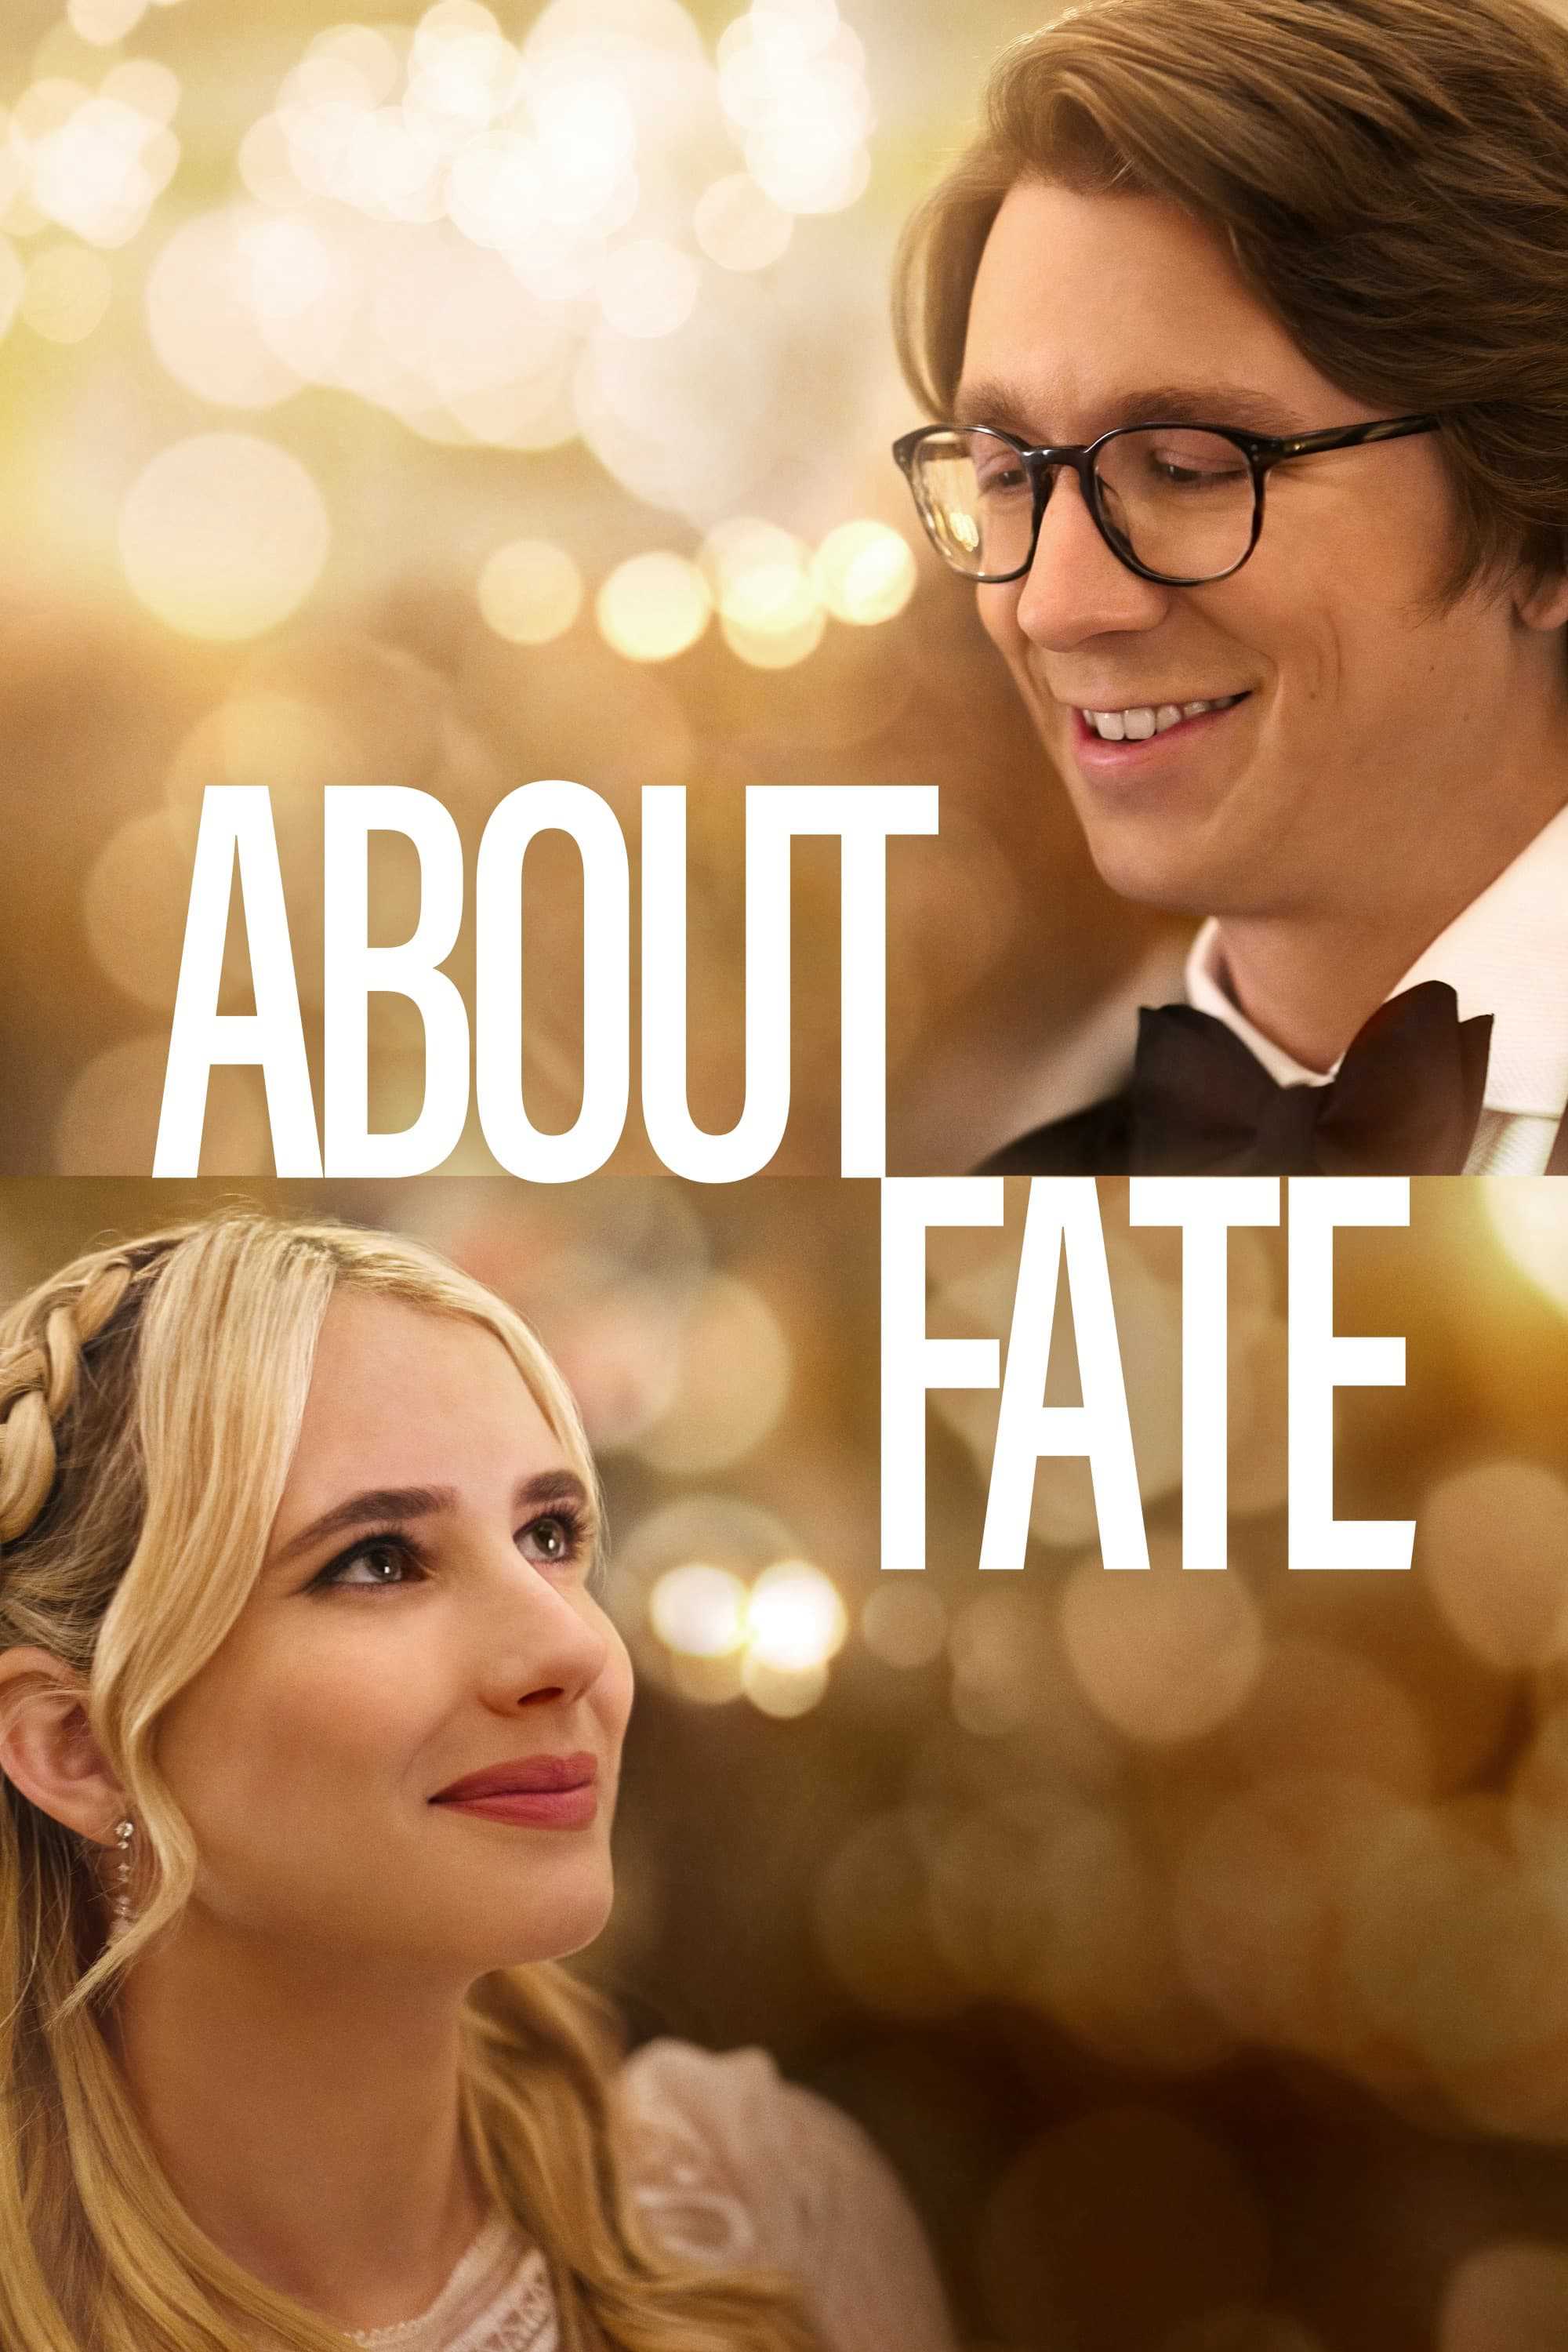 About Fate - About Fate